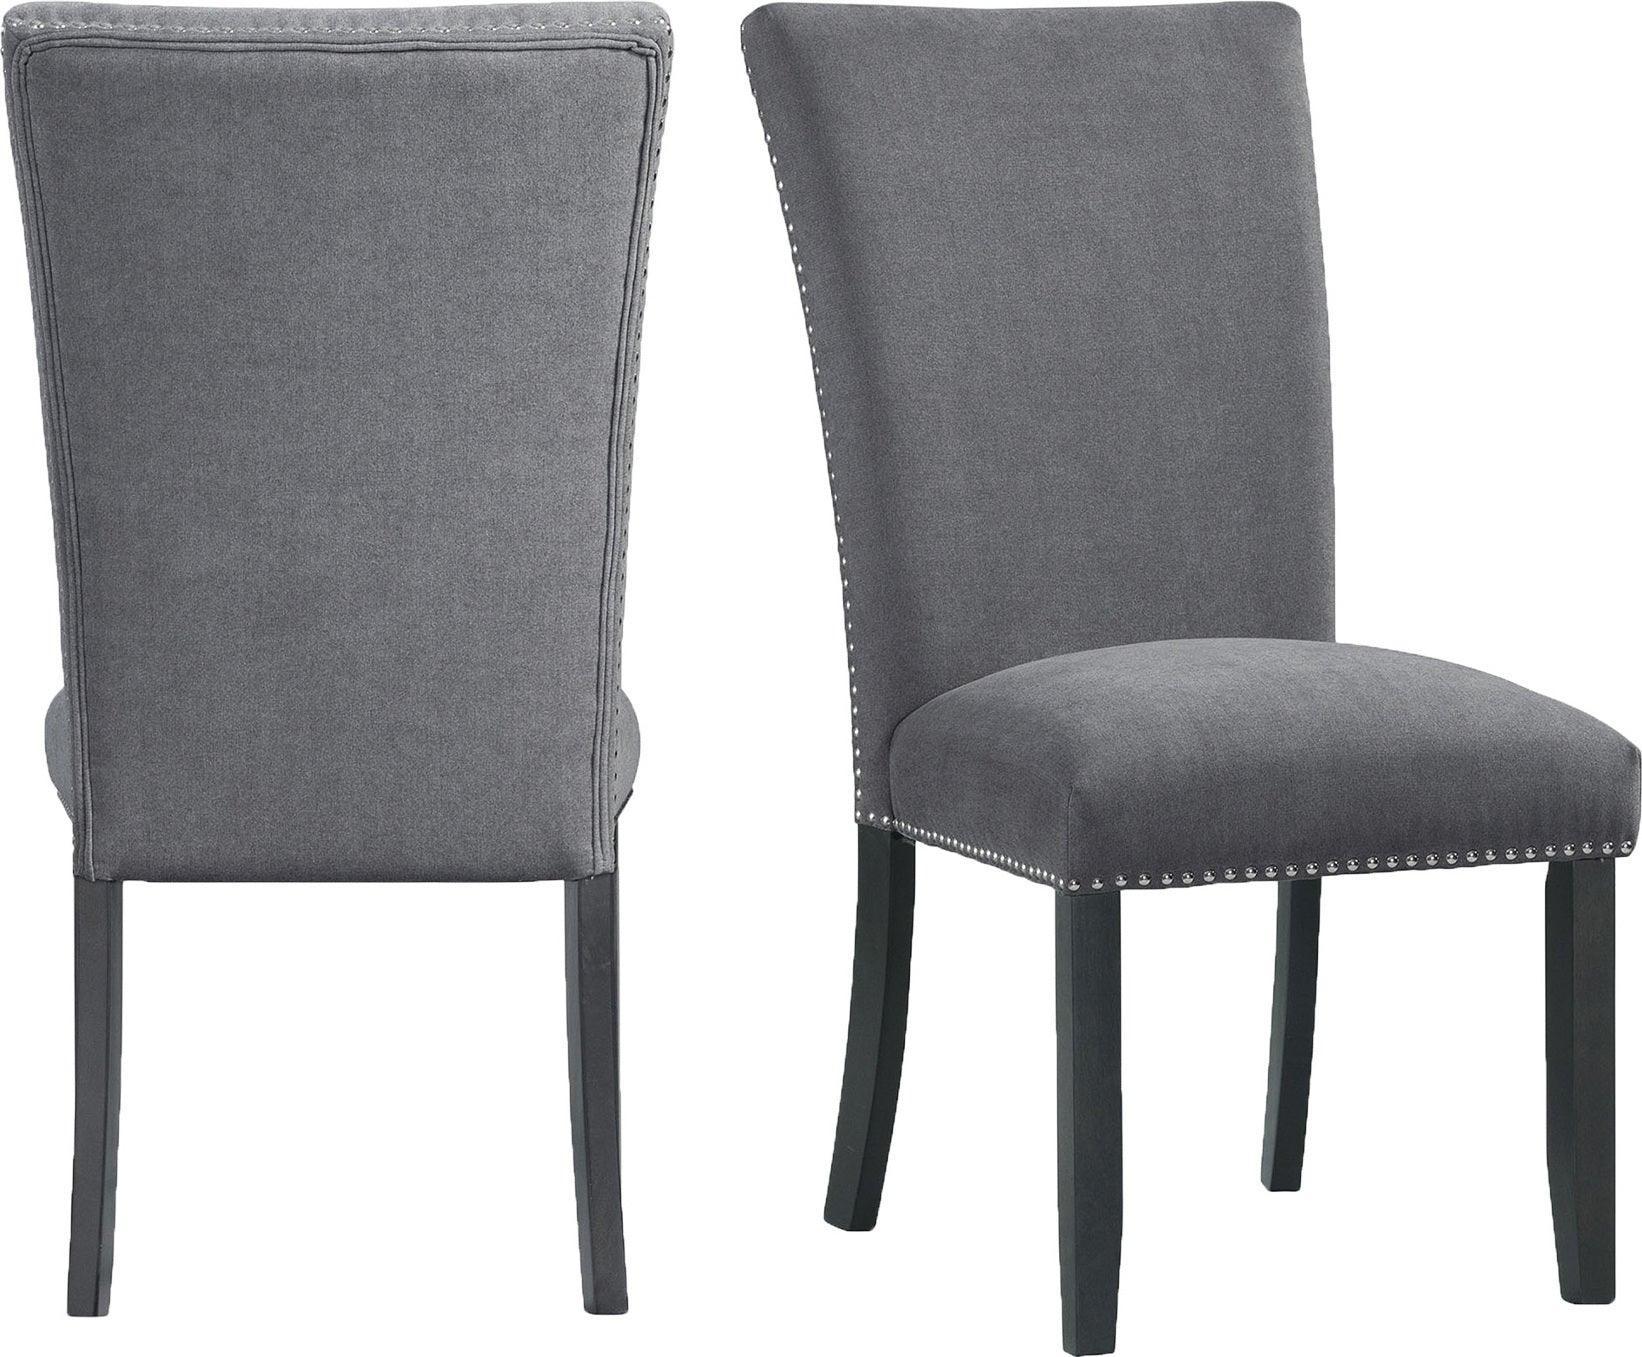 Elements Dining Chairs - Stratton Standard Height Side Chair Set in Charcoal (Set of 2)